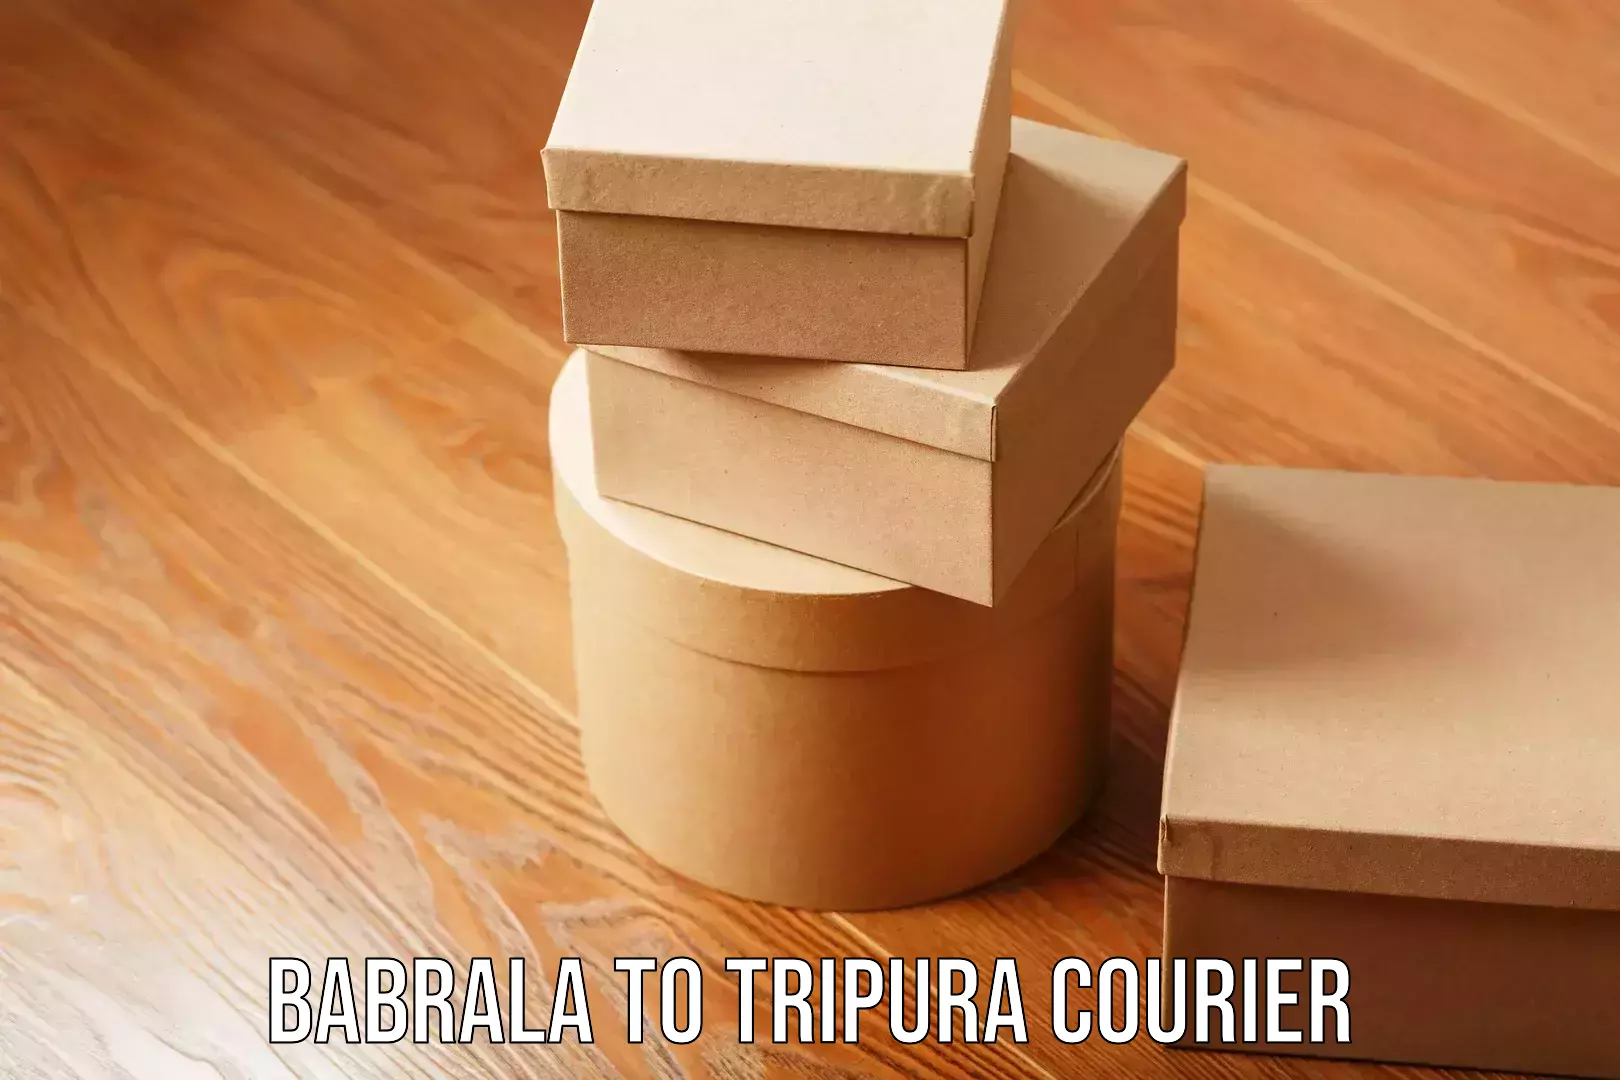 Overnight delivery services Babrala to Tripura